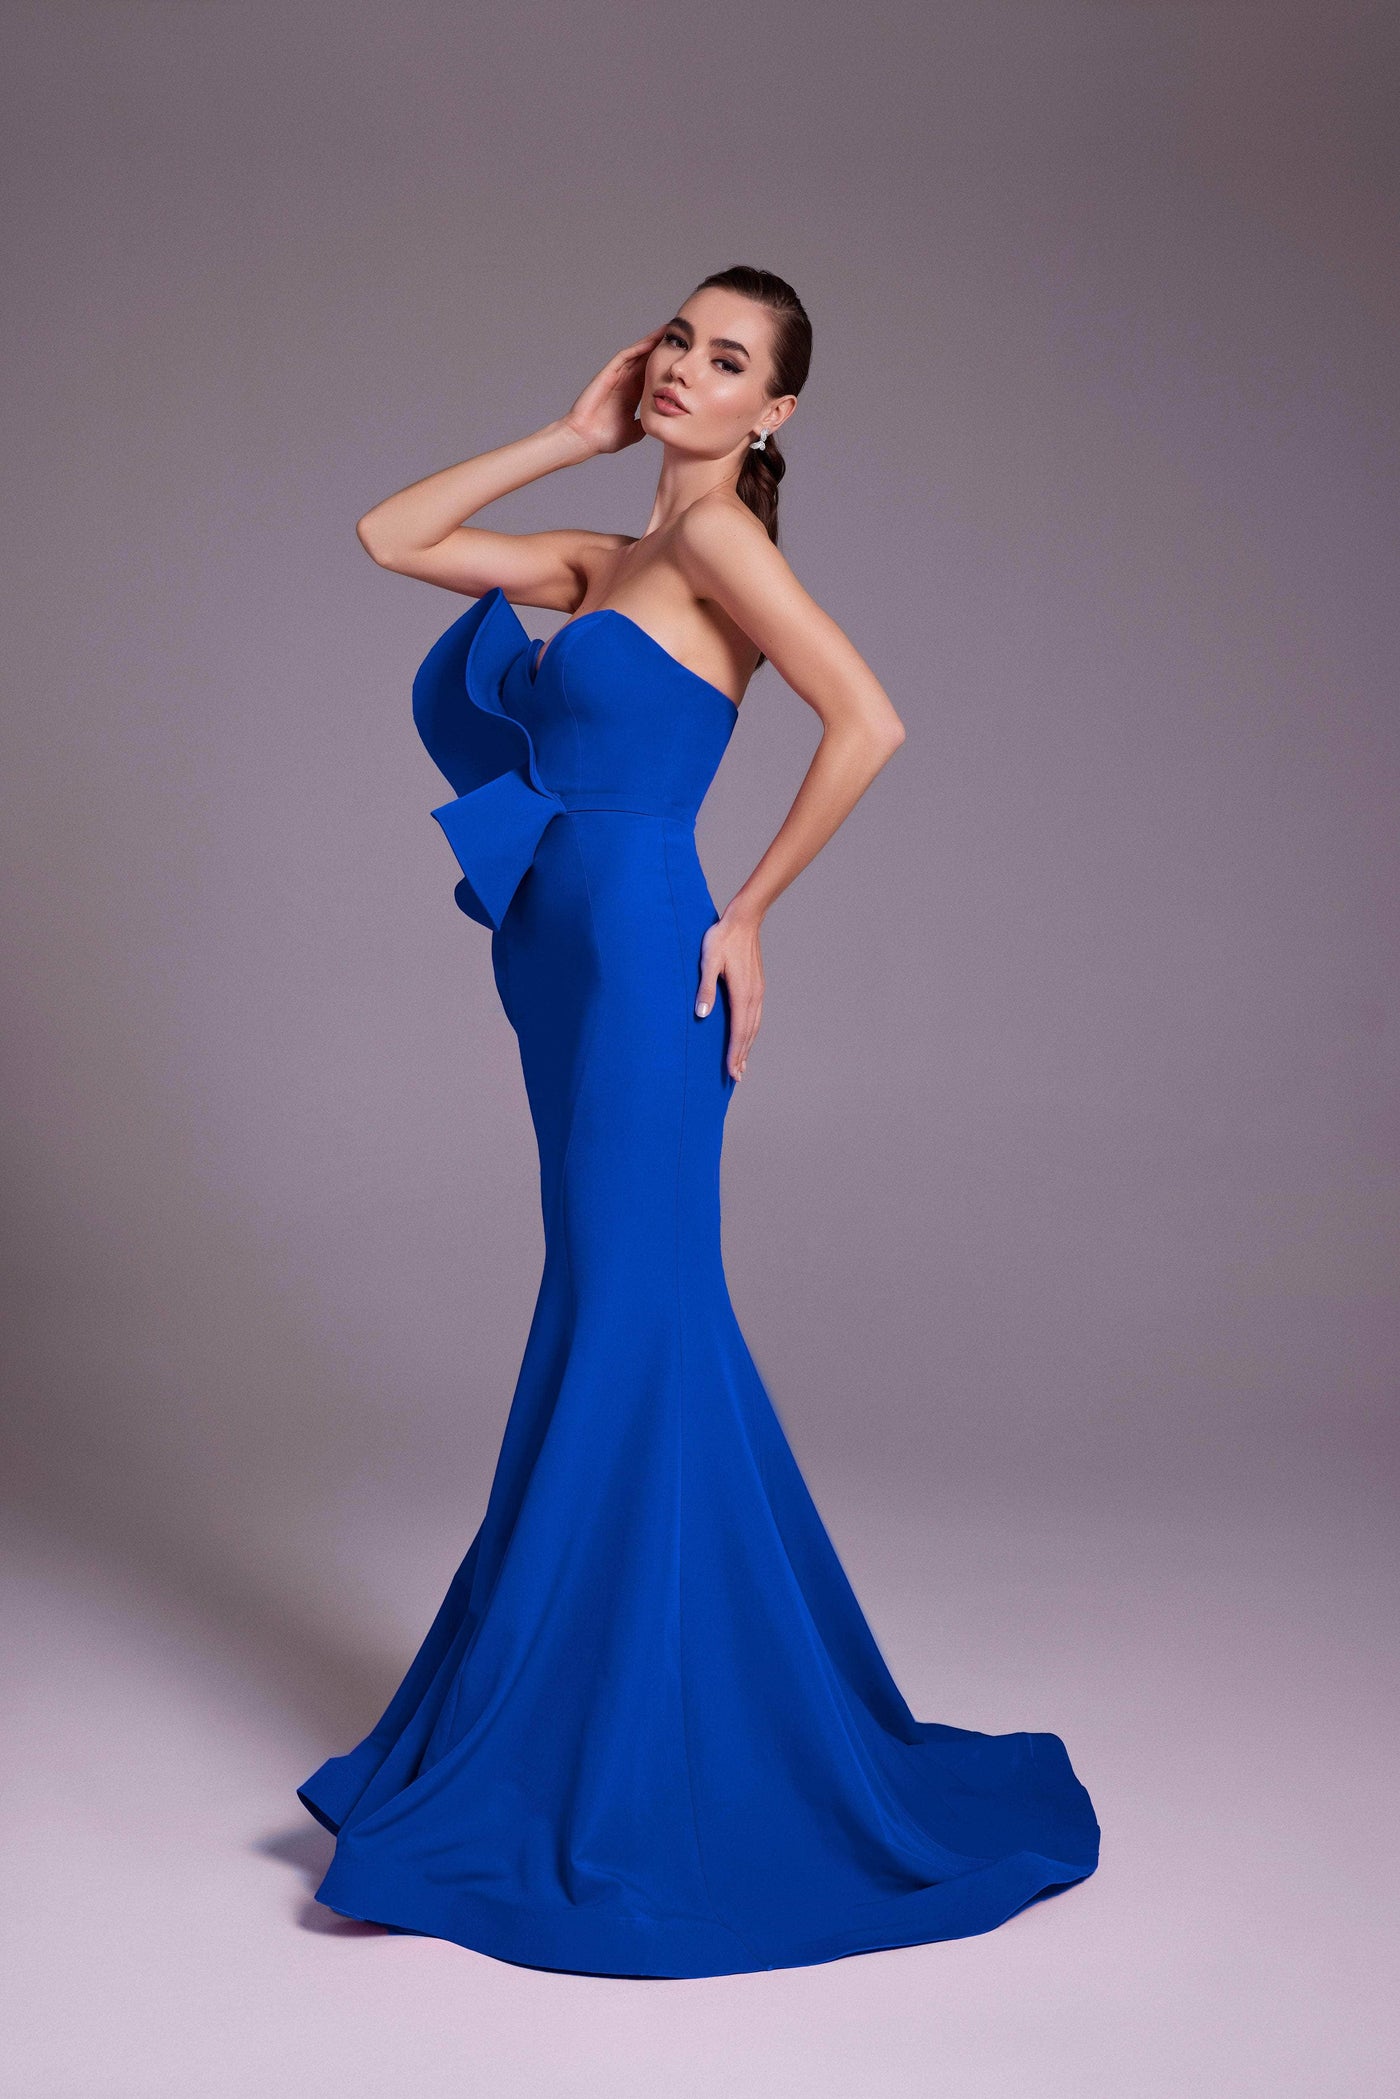 MNM COUTURE N0548 - Crepe Mermaid Gown